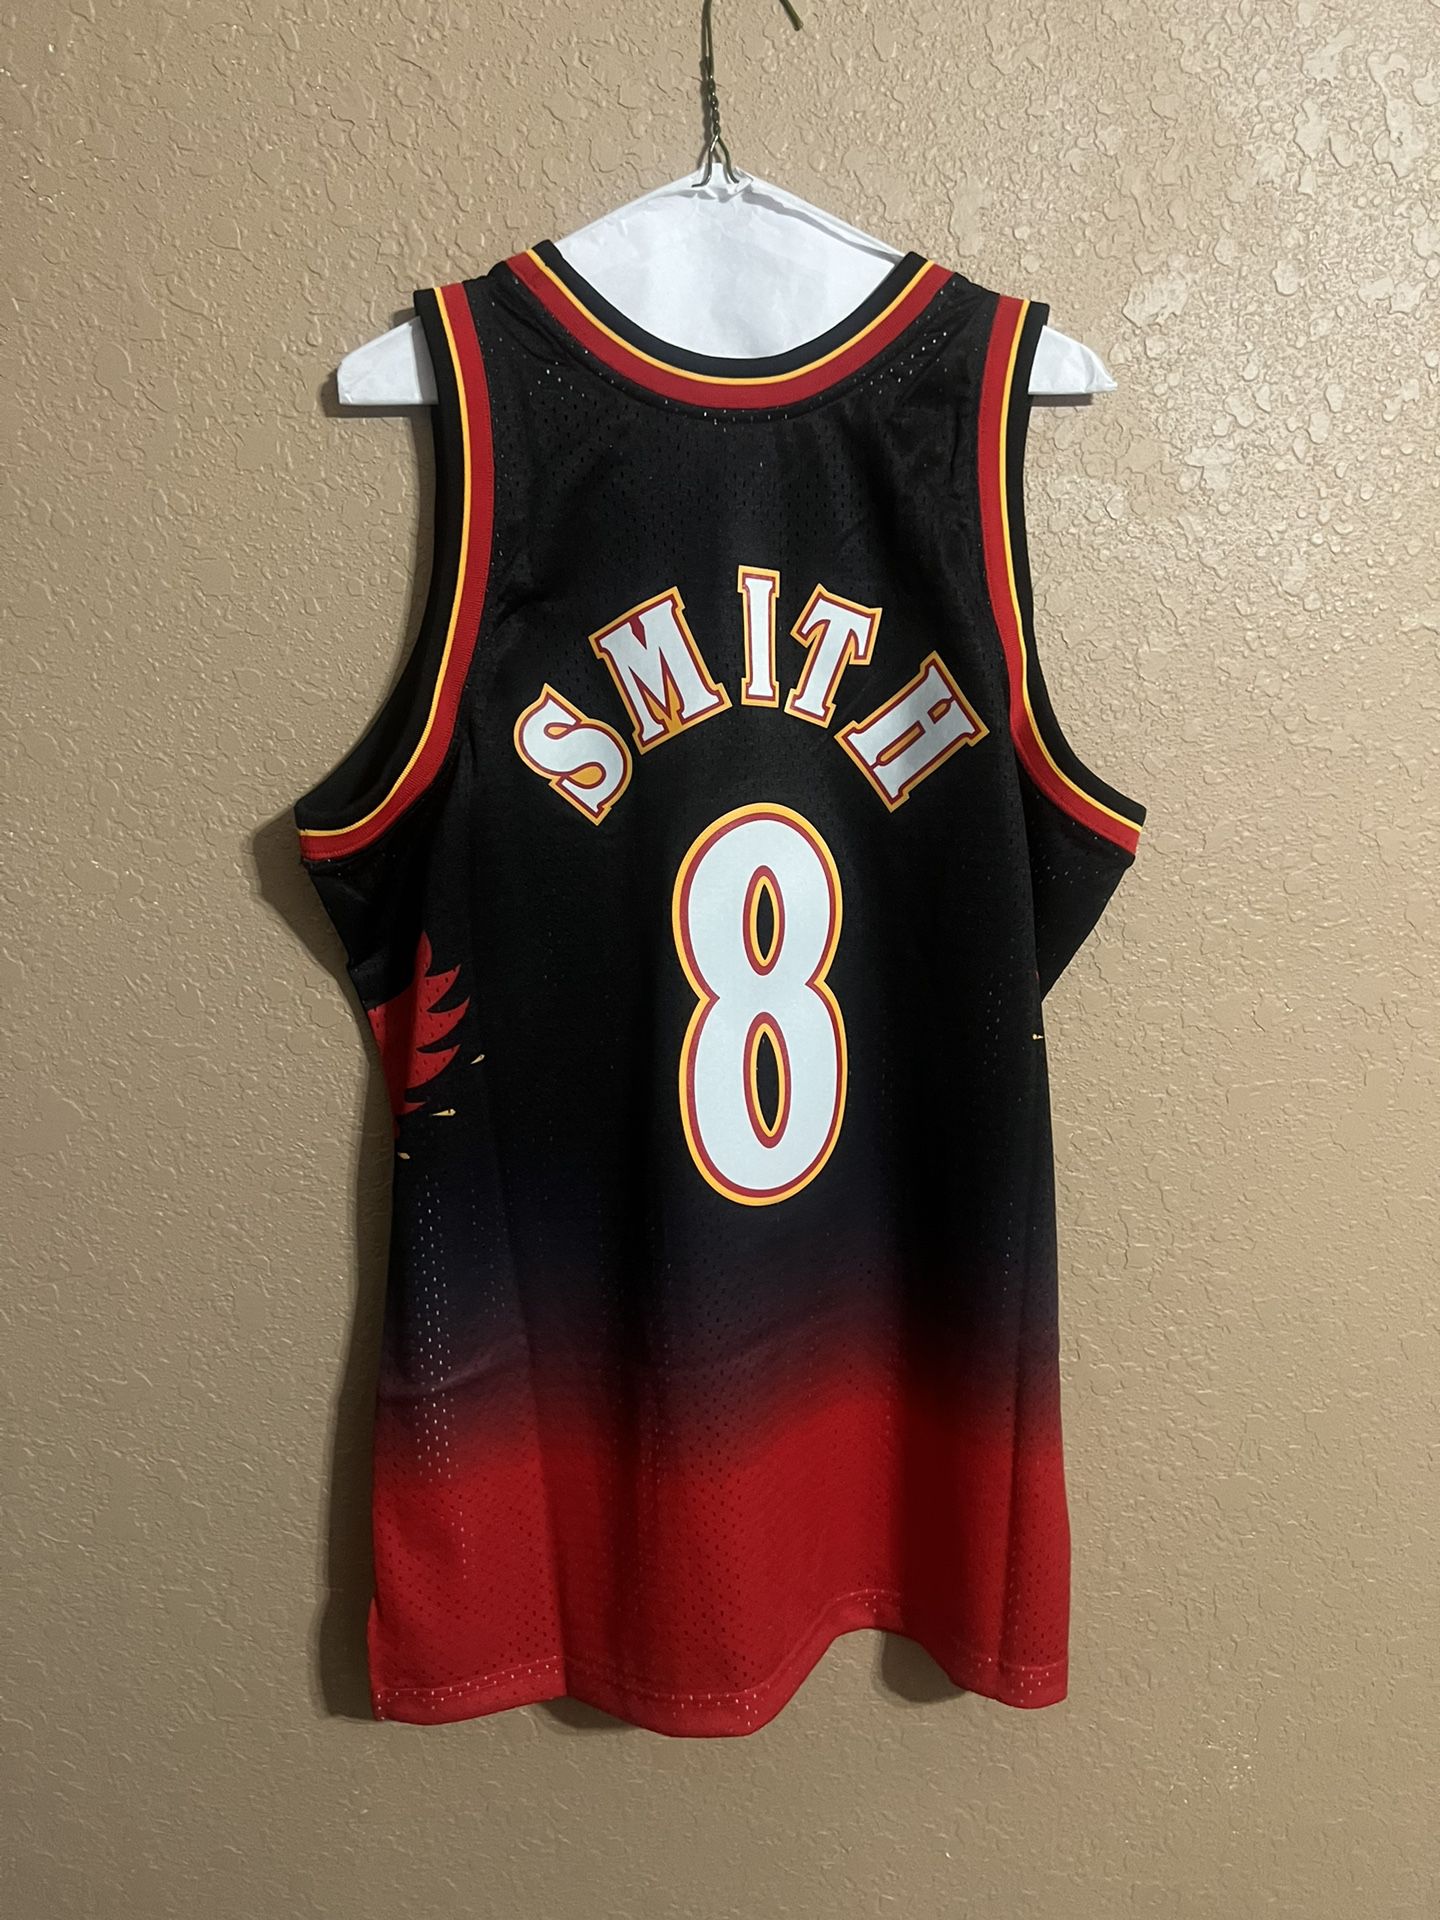 Mitchell And Ness NBA Atlanta Hawks Steve Smith Jersey 1(contact info  removed) New With Tags for Sale in Dayt Bch Sh, FL - OfferUp